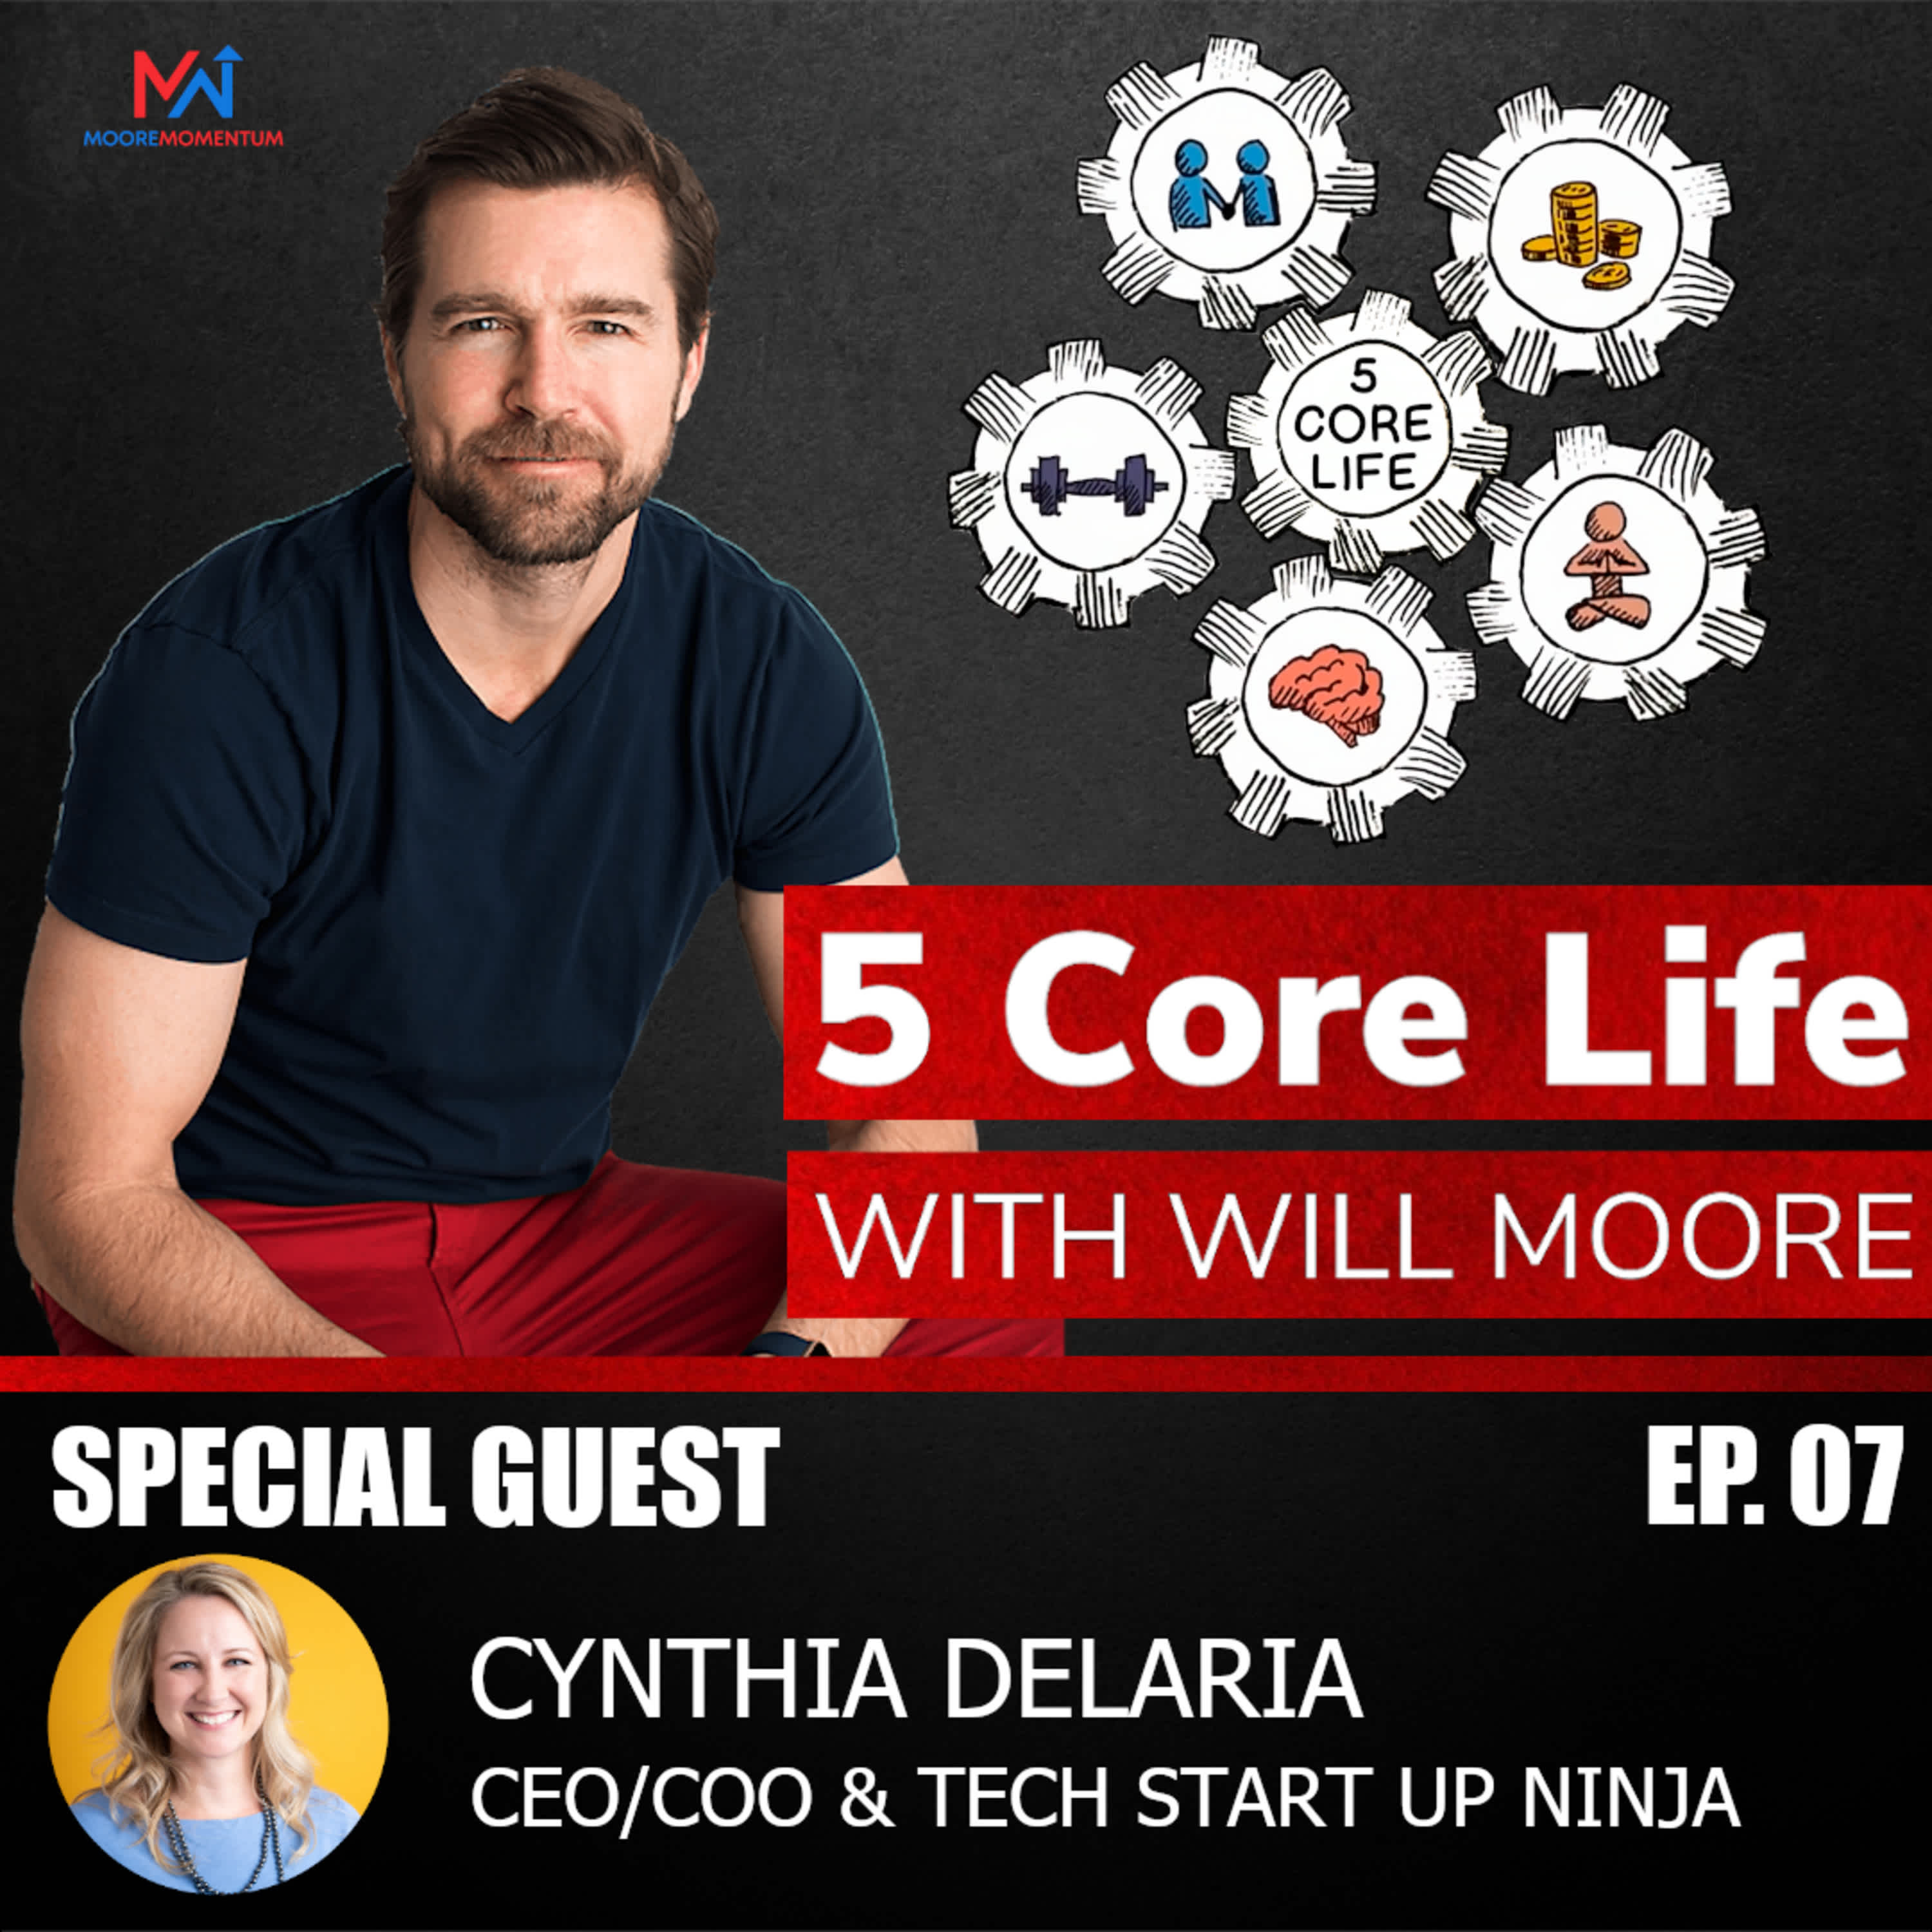 Are you using technology to create successful habits? Join Will and Special Guest Cynthia Delaria To Discuss Using Technology To Gain Momentum